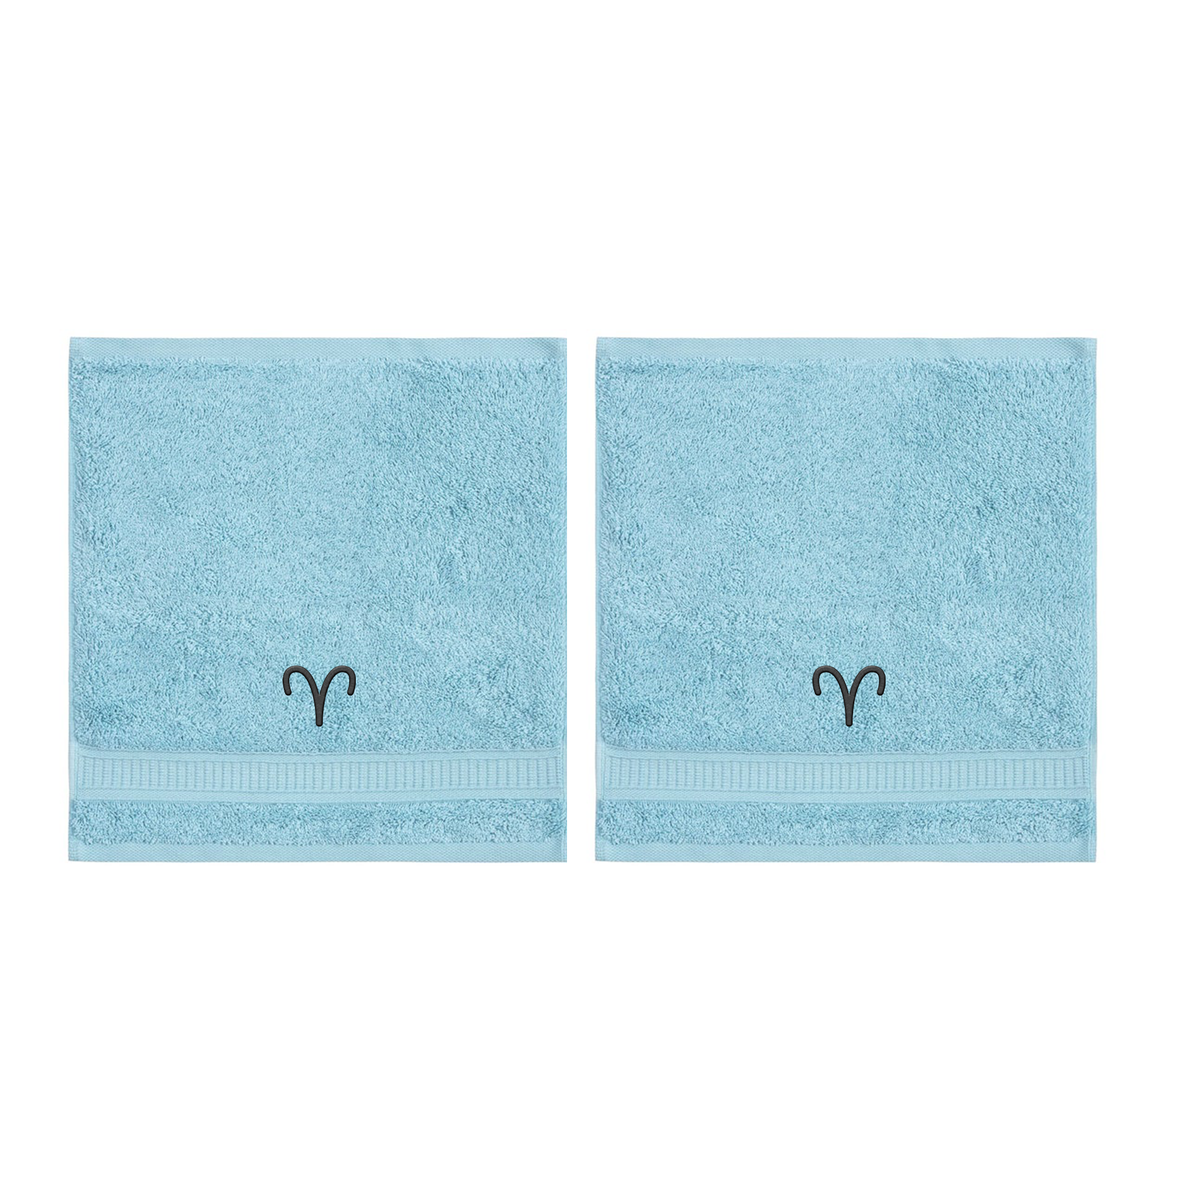 Customized Zodiac Towels - Washcloths and Hand Towels - Set of 2